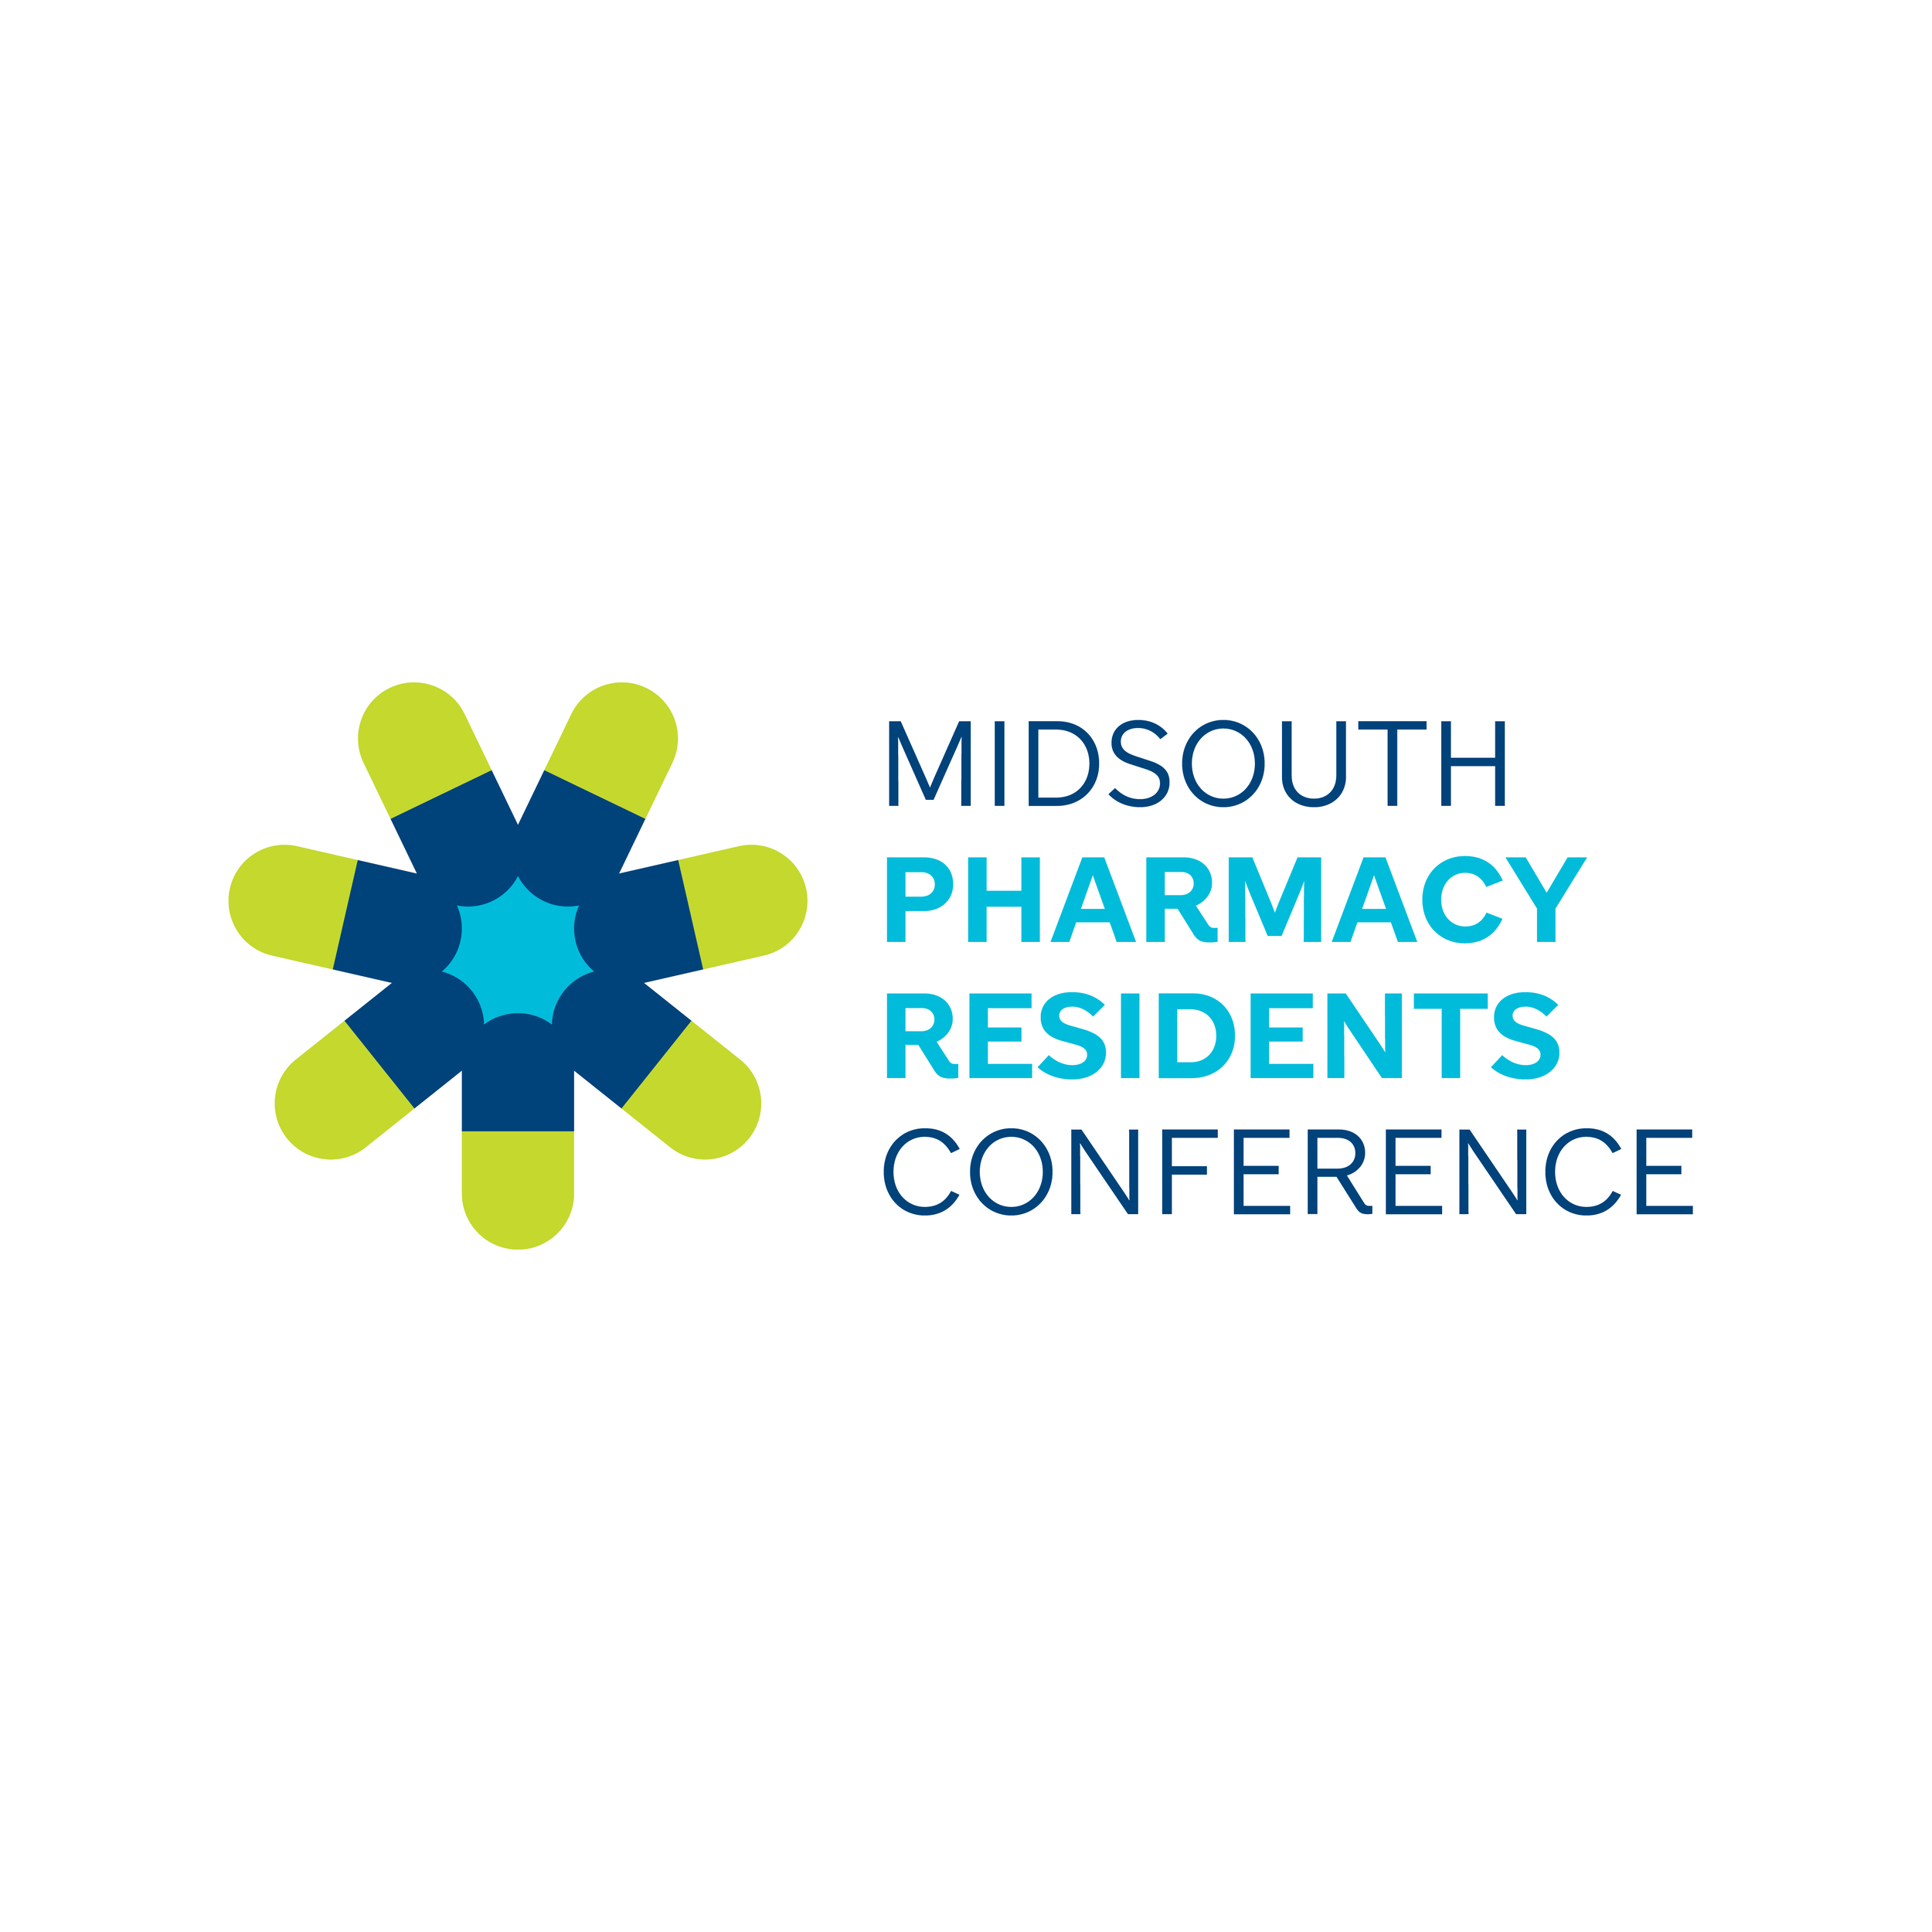 Memphis MidSouth Pharmacy Residents Conference, St. Jude Pharmacy